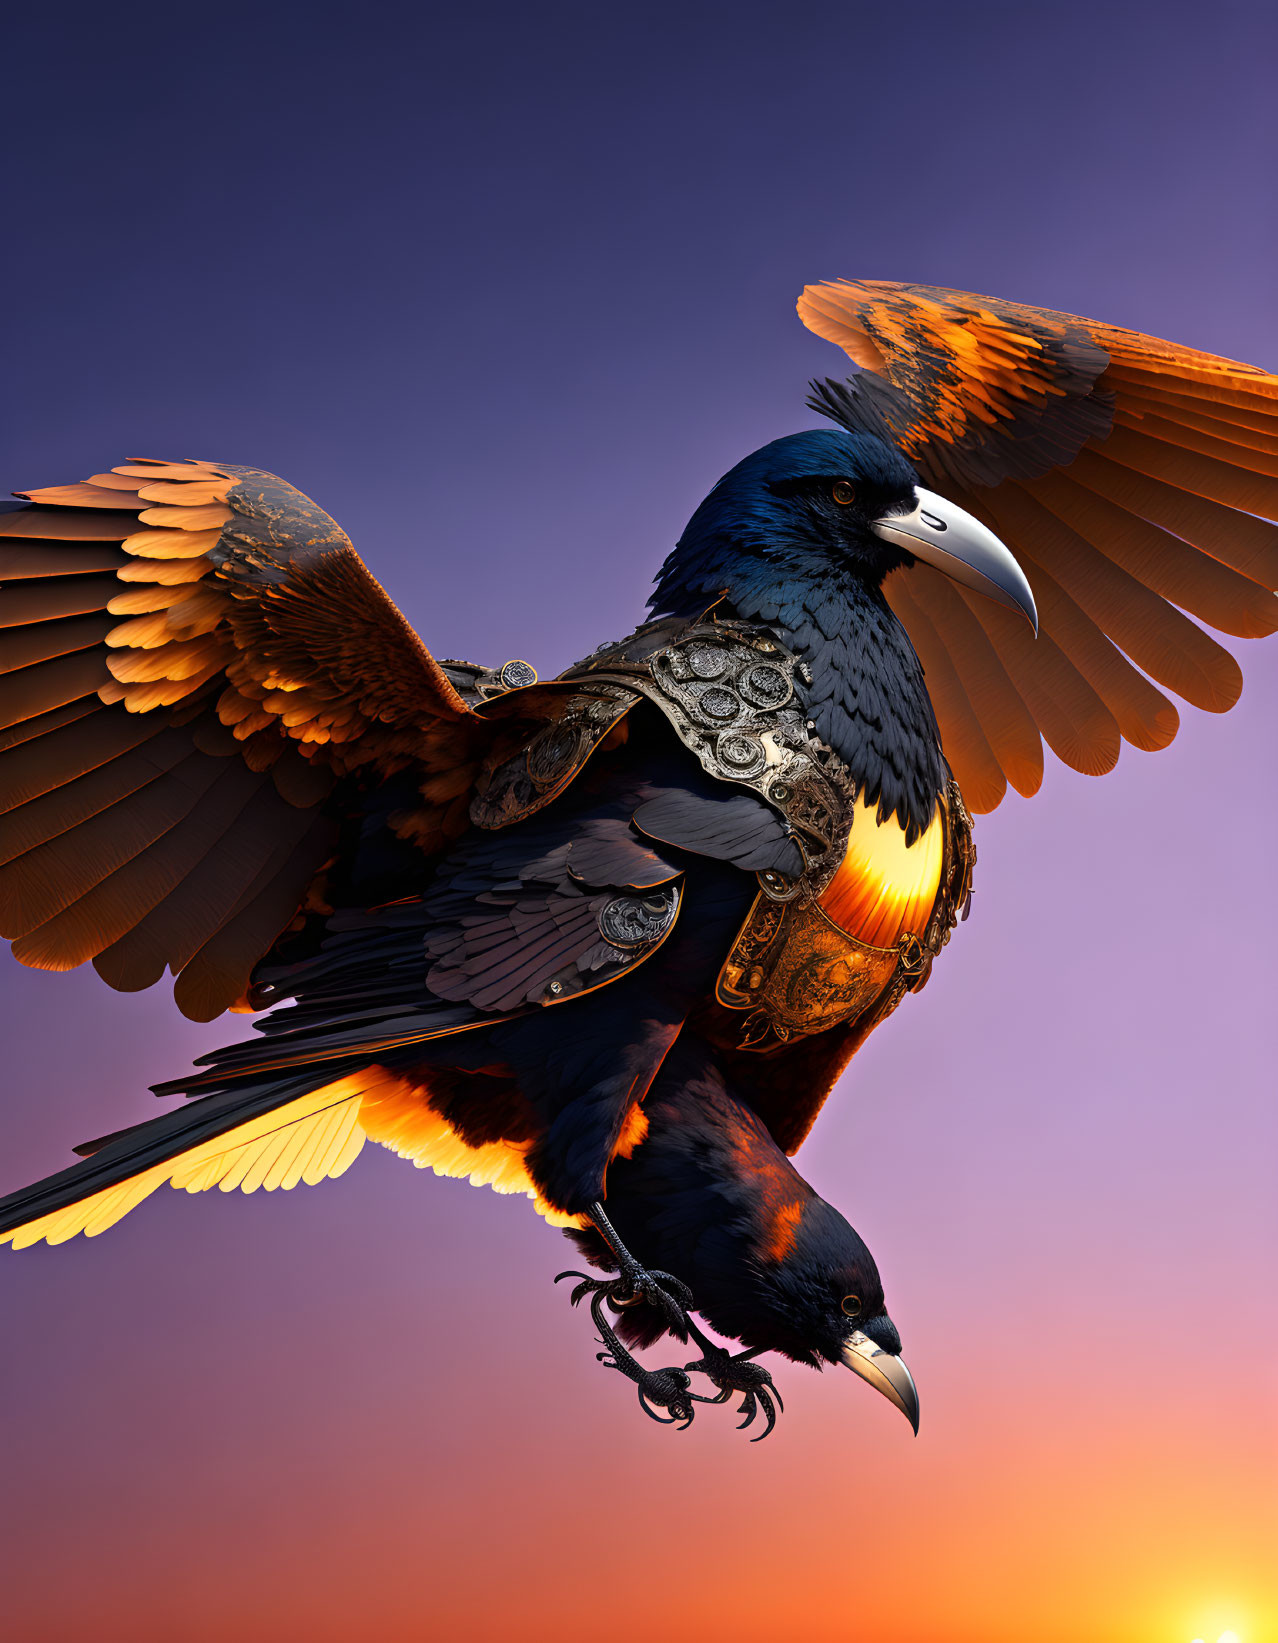 Majestic raven with outstretched wings in ornate armor, flying in twilight sky